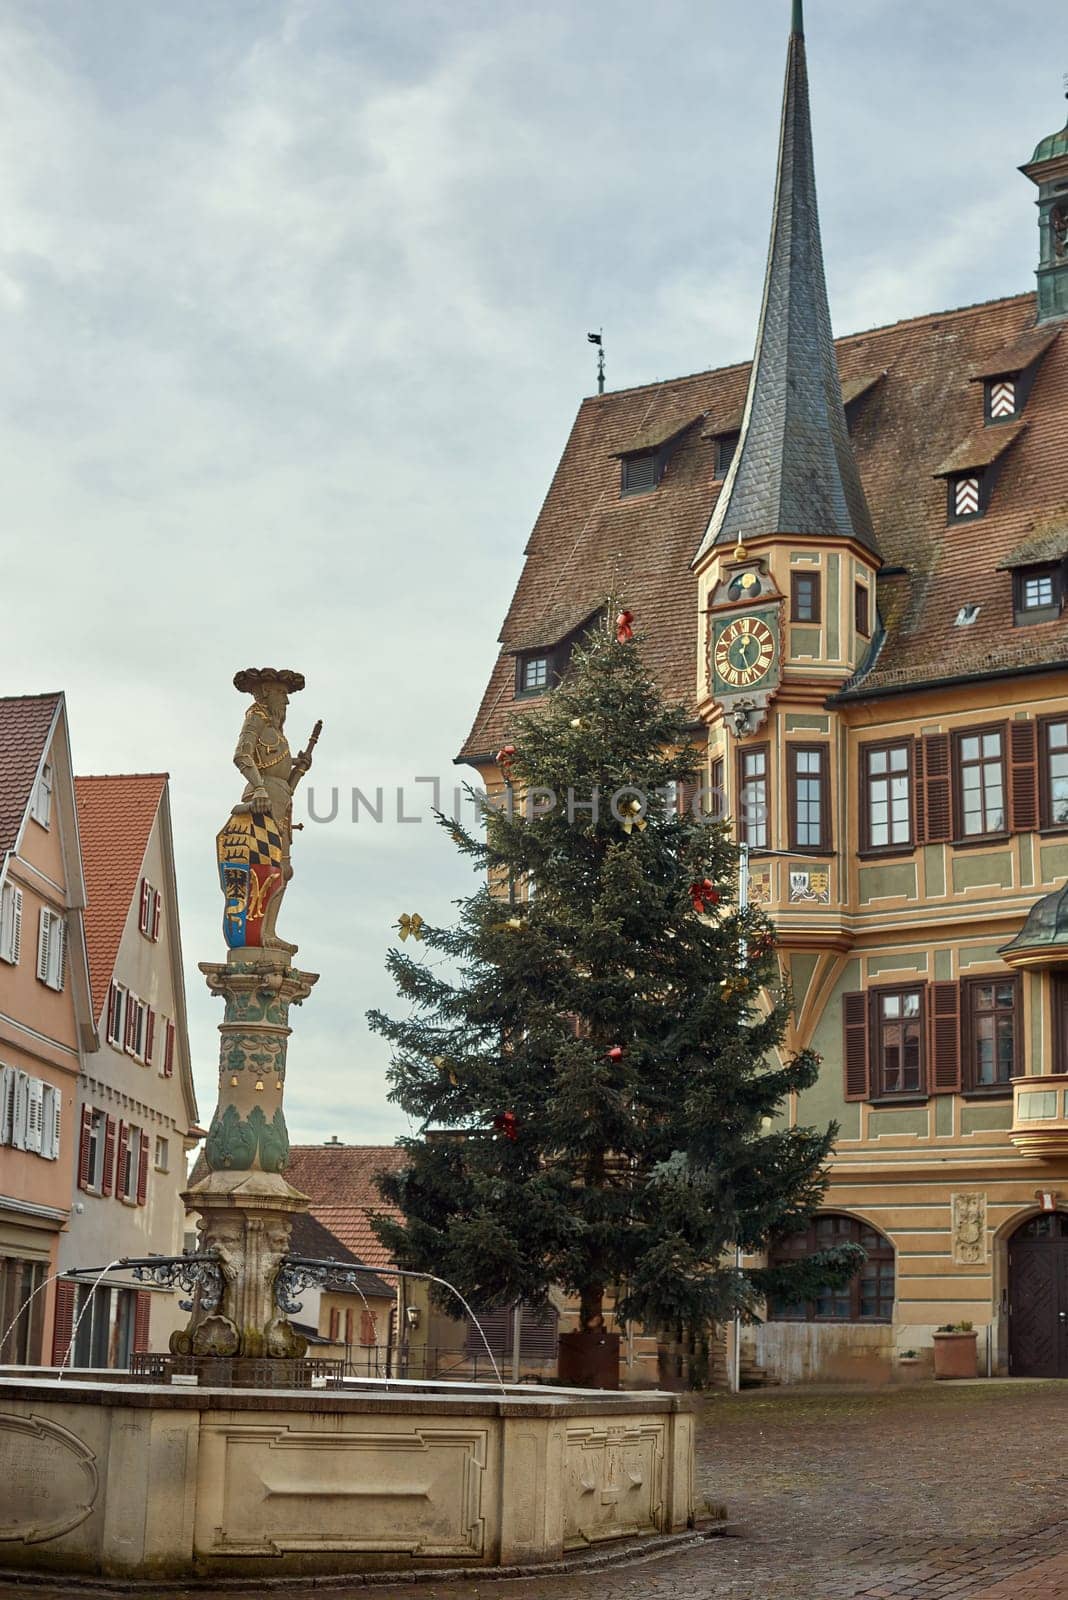 Winter Festivities in Bitigheim-Bissingen: Charming Half-Timbered Houses Adorned with Christmas Decorations. New Year's atmosphere of Bitigheim-Bissingen, Baden-Württemberg, Germany by Andrii_Ko